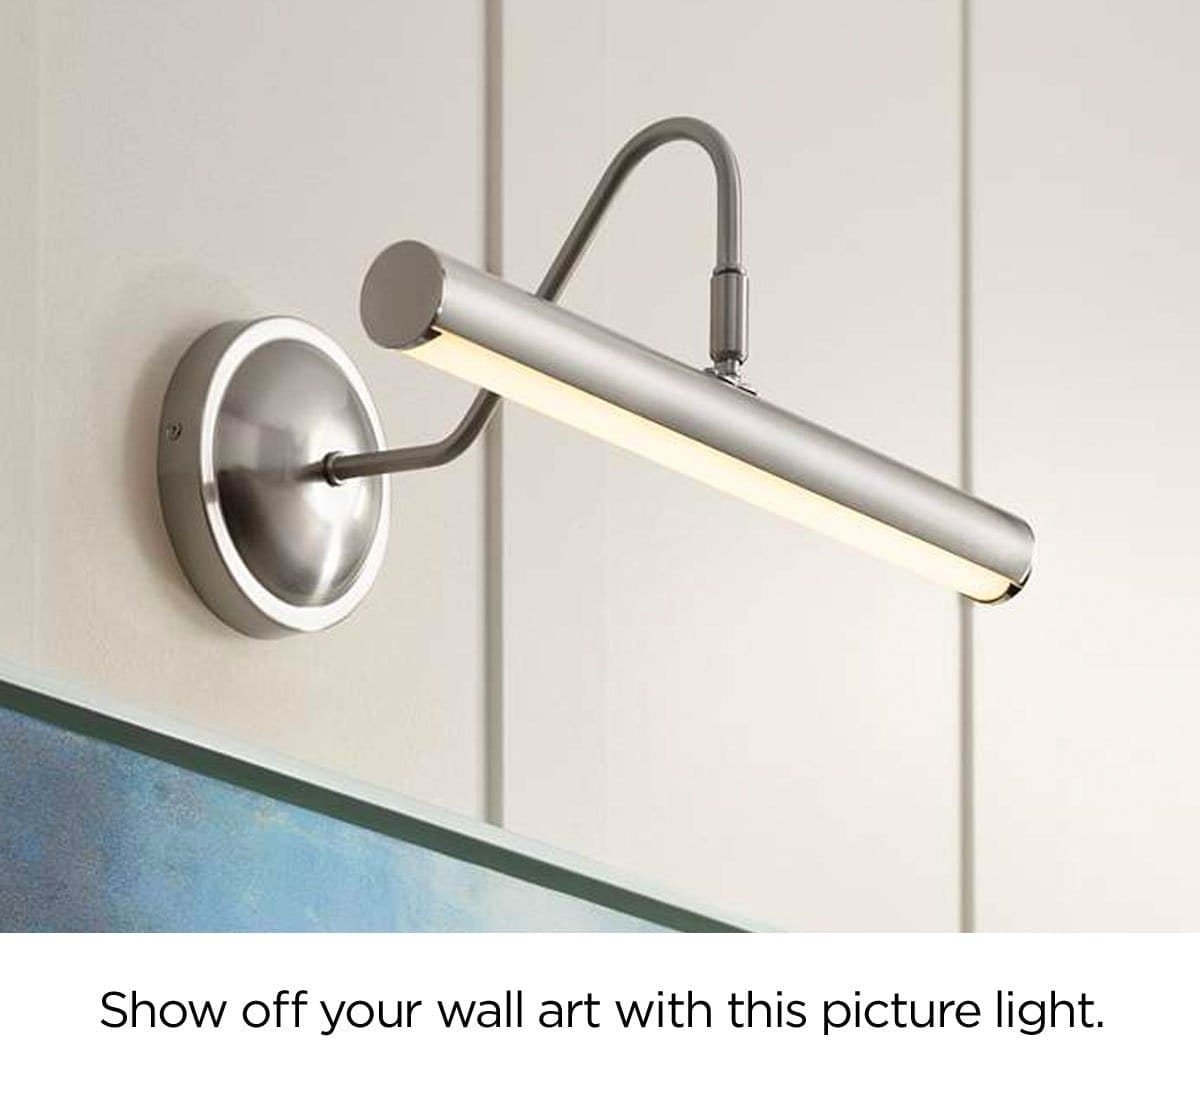 Show off your wall art with this picture light.